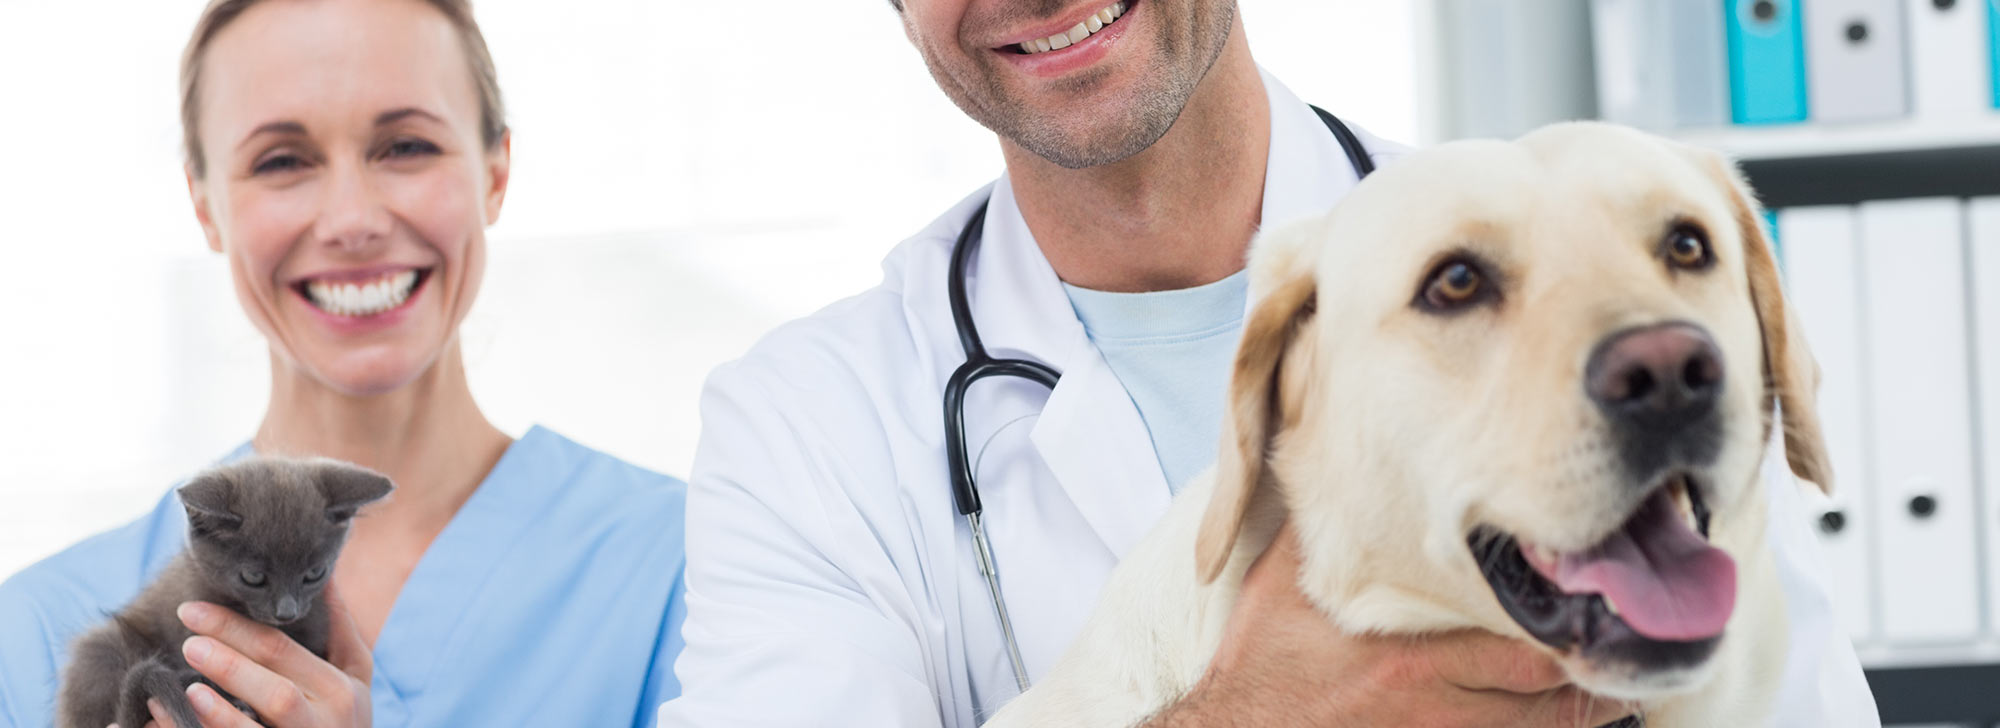 Smiling veterinarians looking after animals